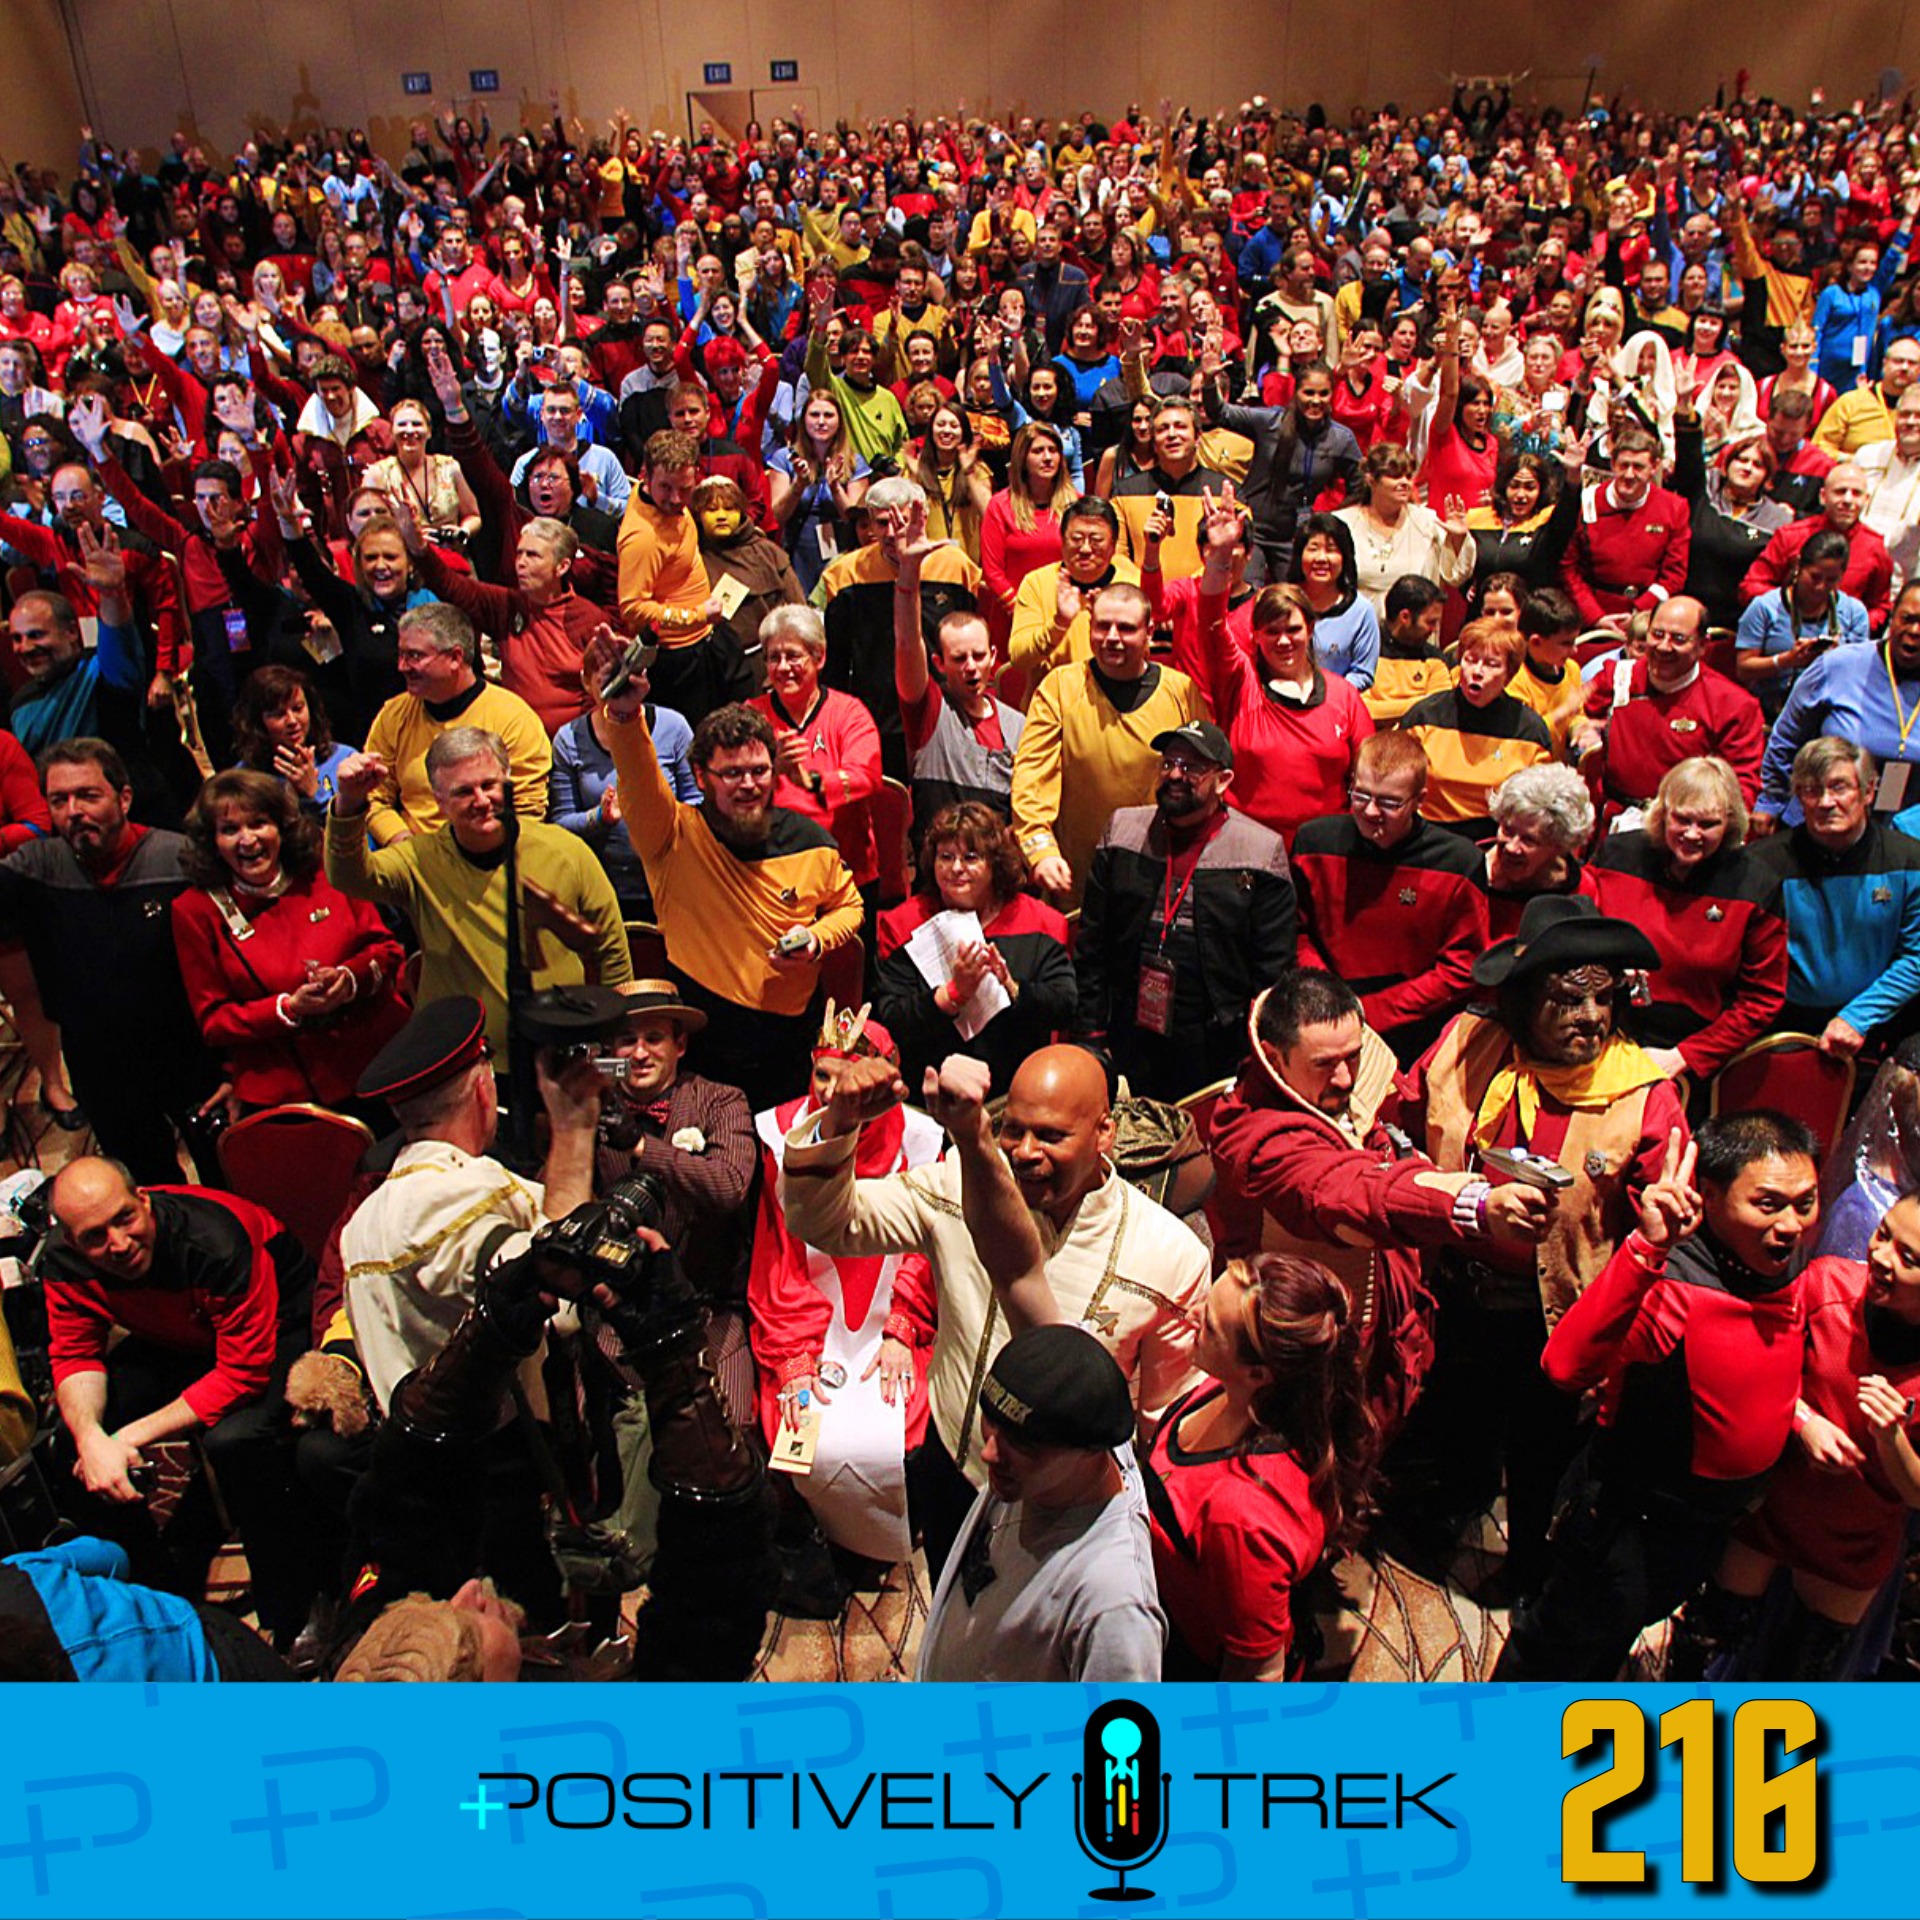 Star Trek Conventions and the Fans Who Love Them Image